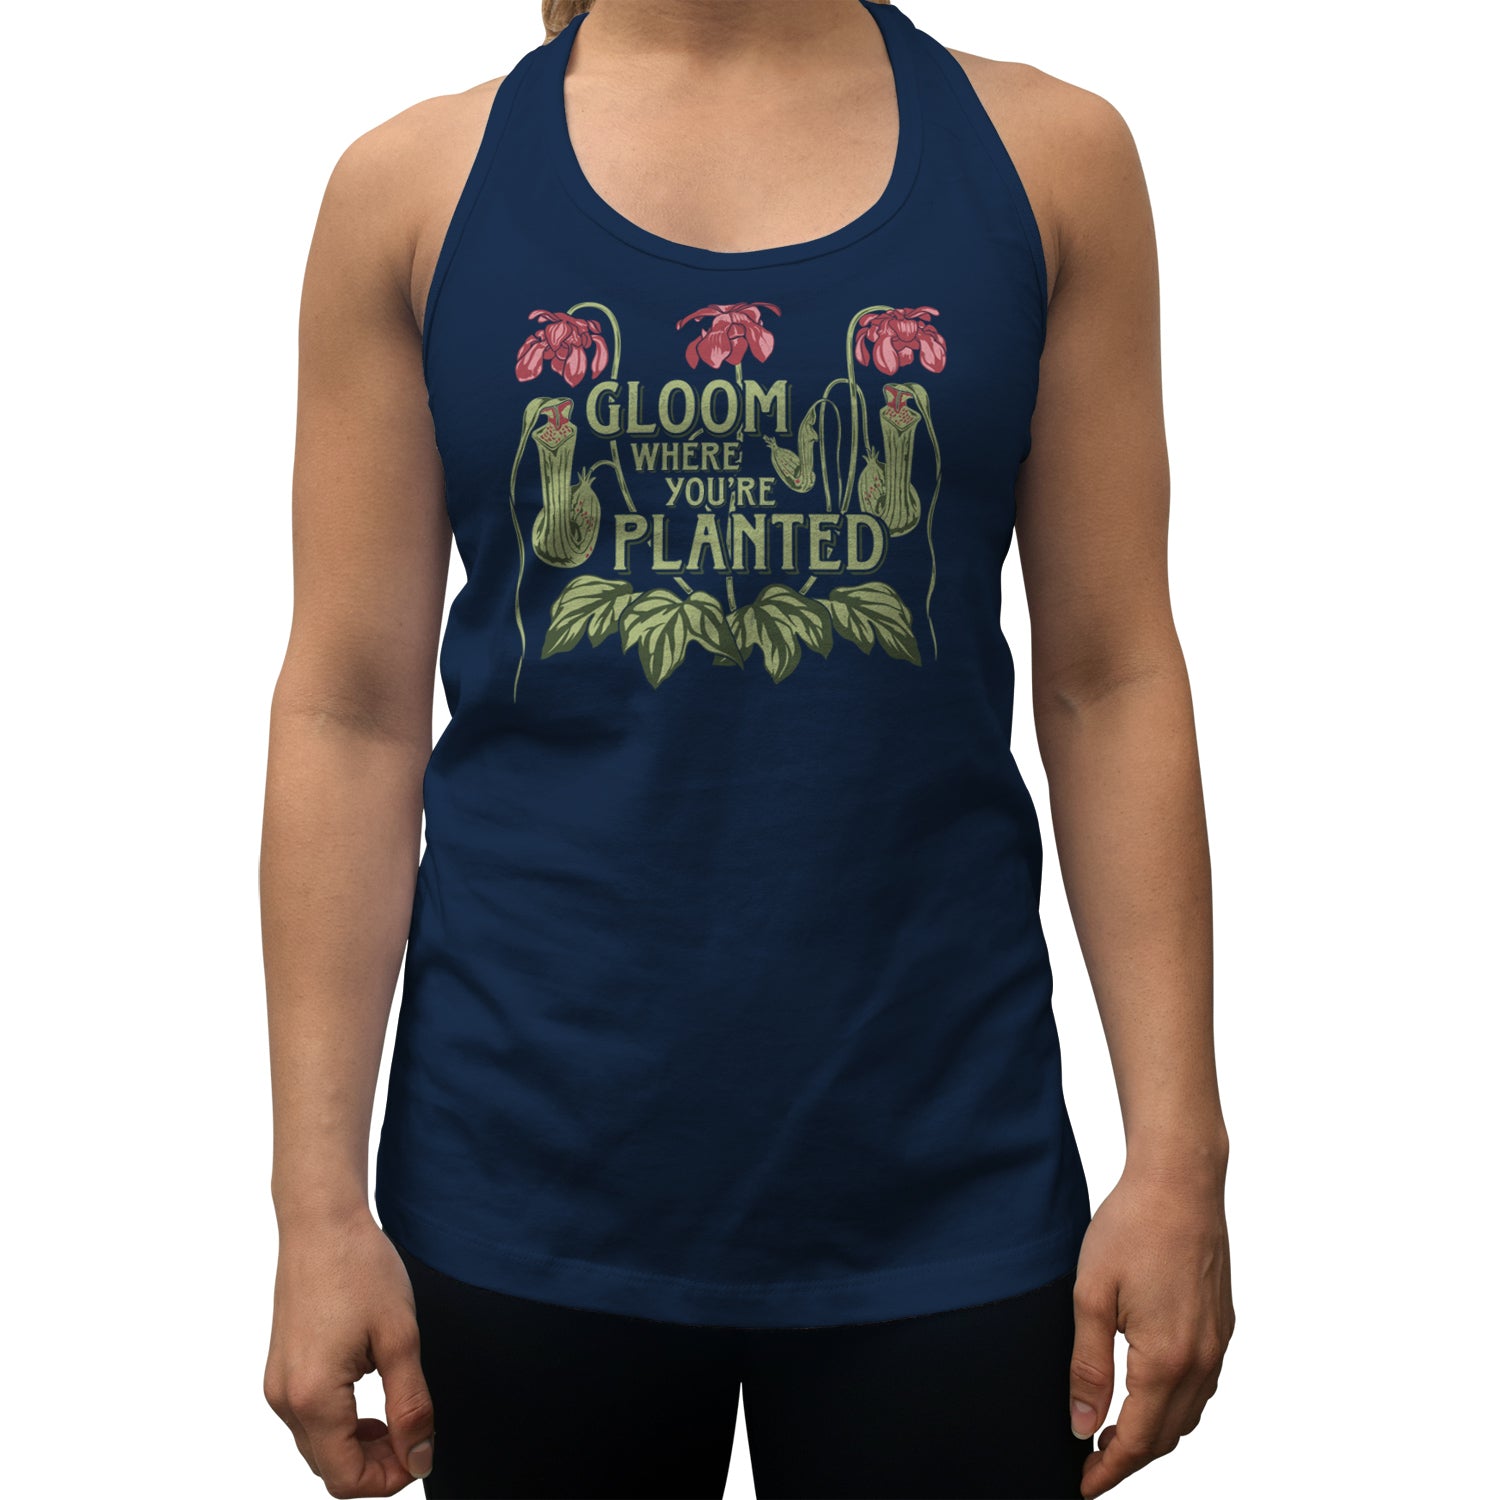 Women's Gloom Where You're Planted Racerback Tank Top